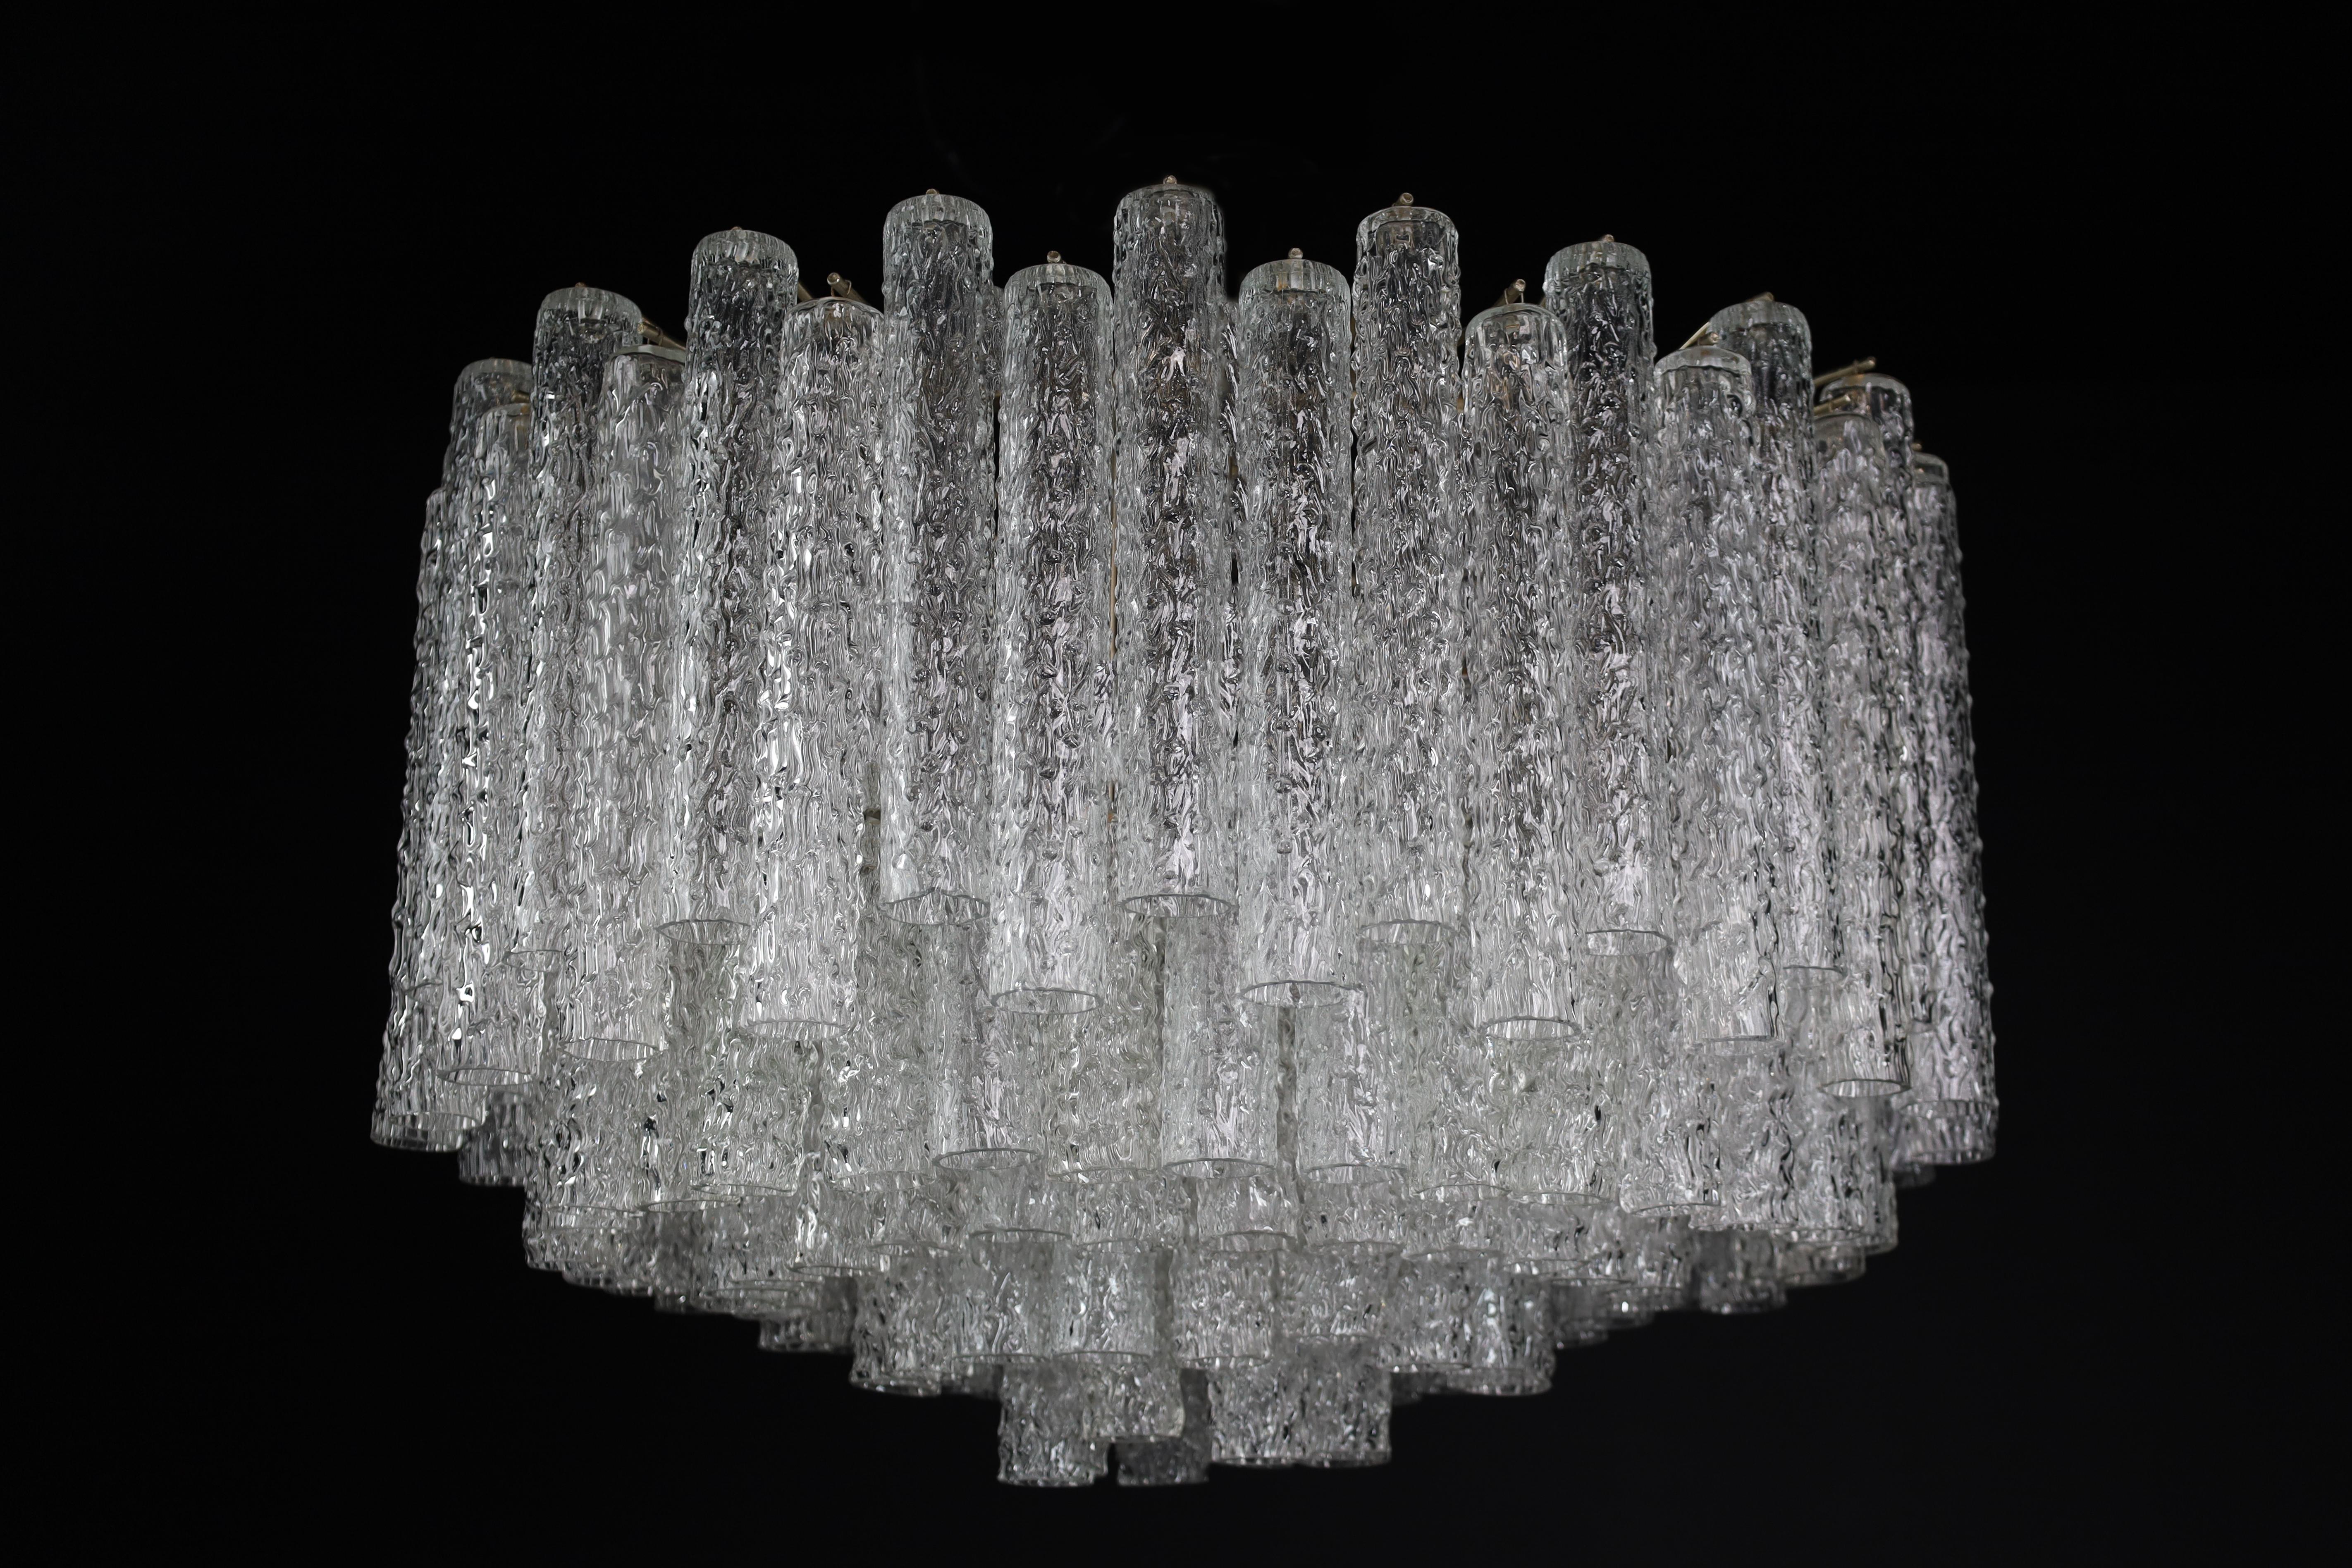 Grande midcentury chandelier designed by Venini with Murano glass, Italy 1950s

This grande chandelier consists of countless glass 'tubes' with textured designs of Murano glass and is mounted on a tiered metal frame. The sheets beautifully refract